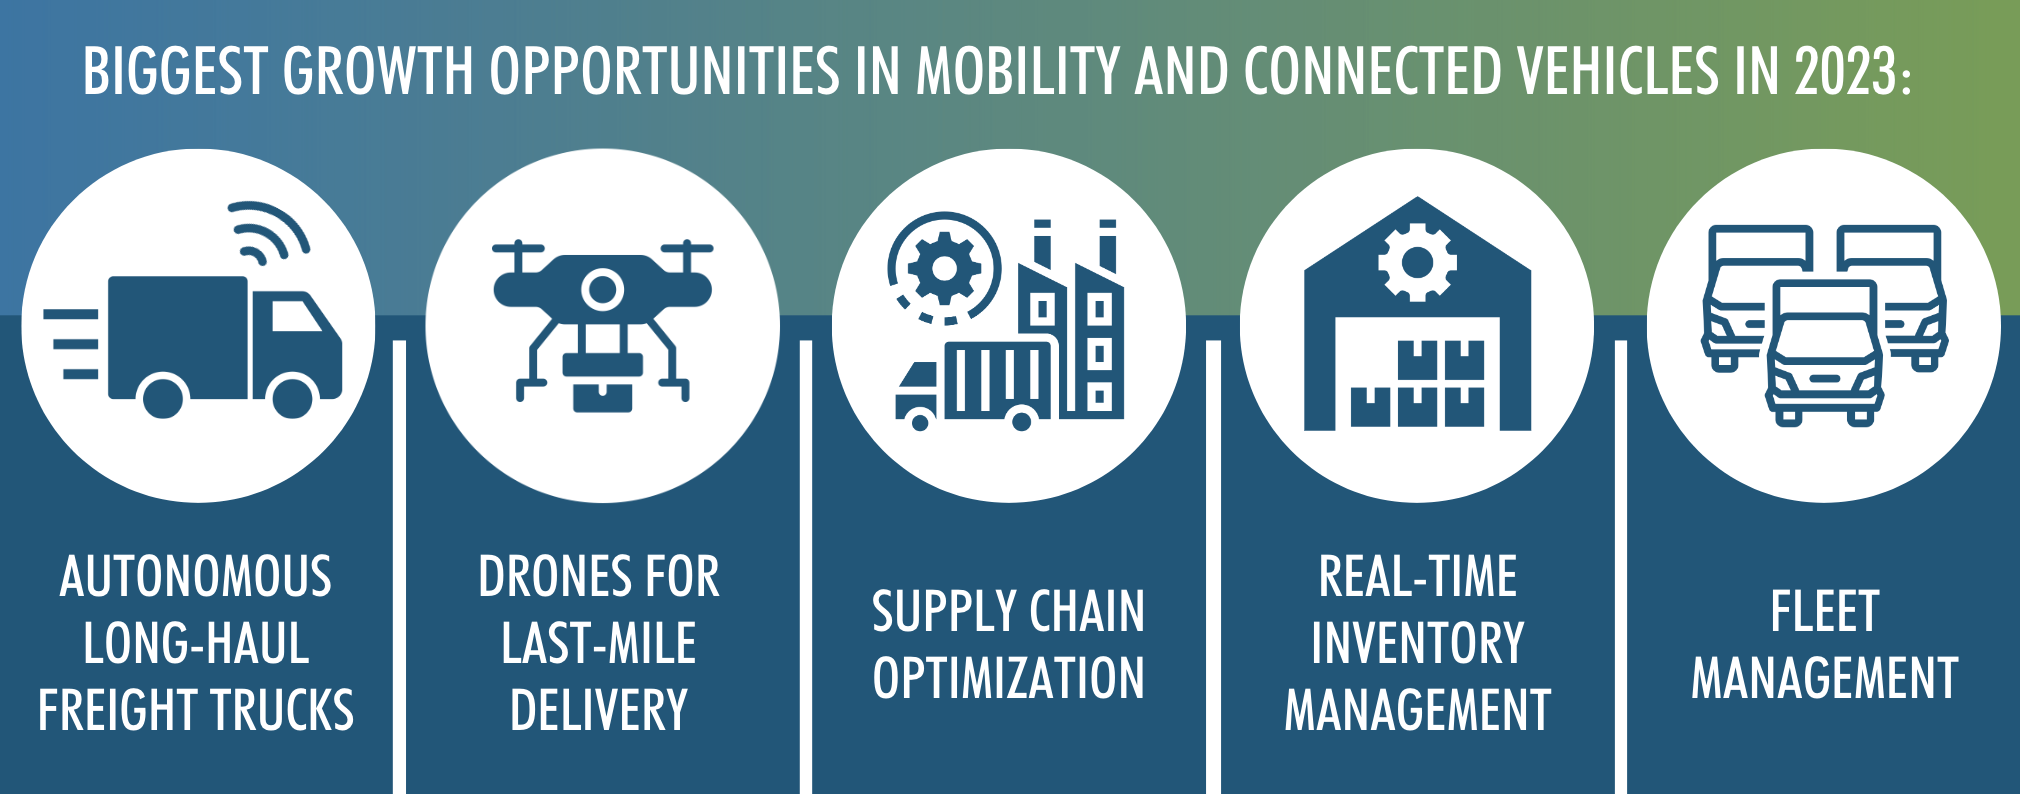 Biggest Growth Opportunities in Mobility 2023